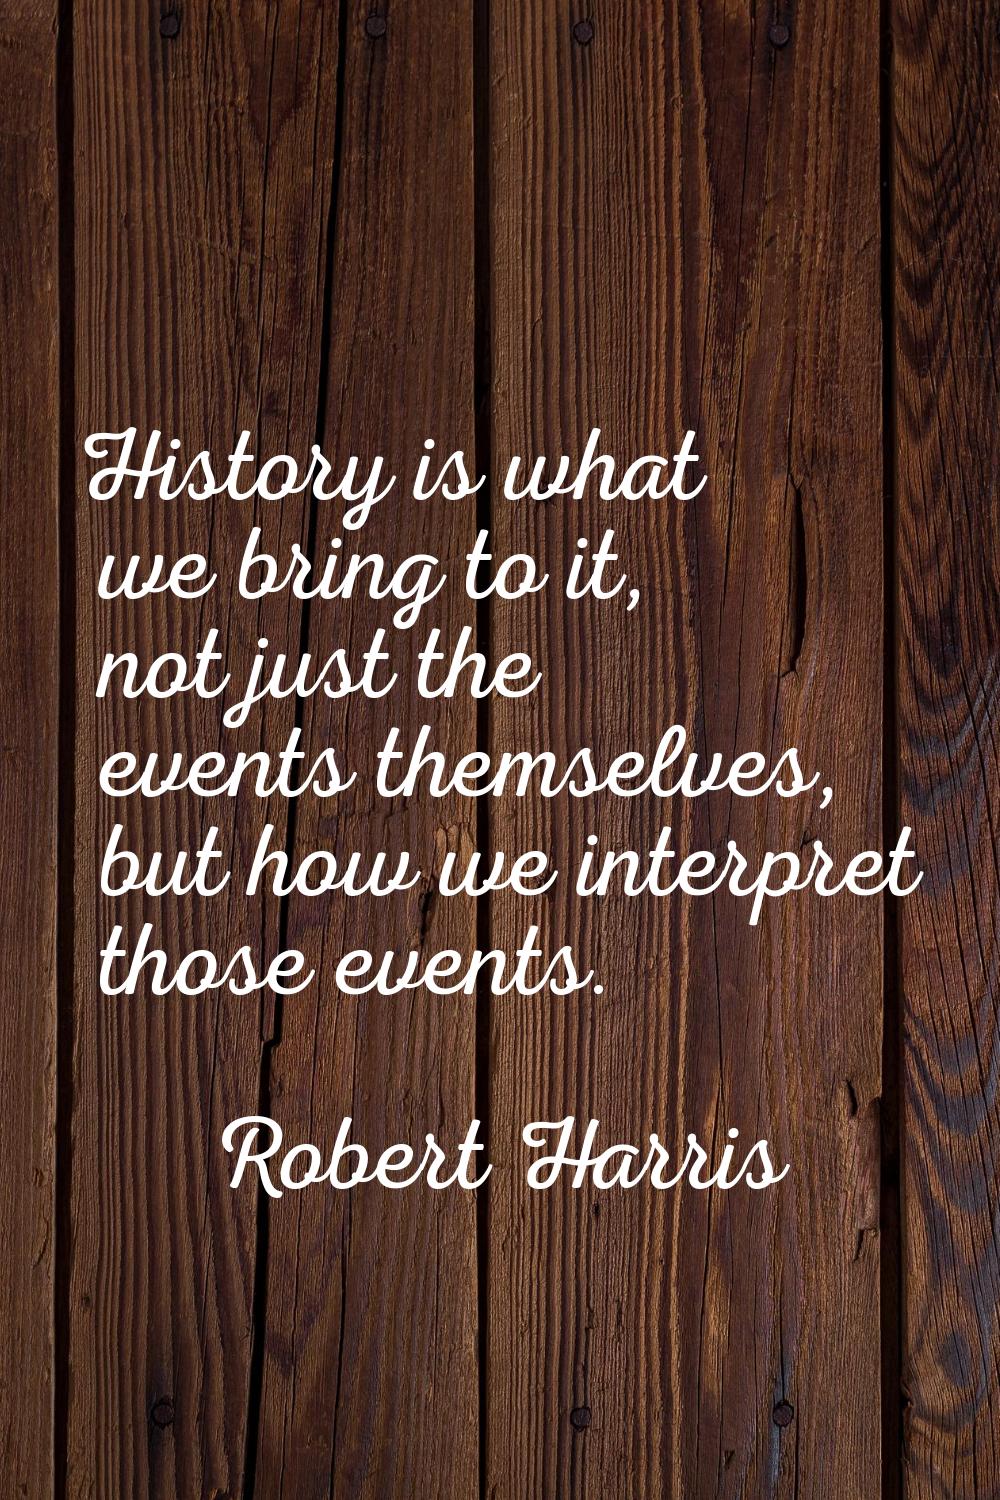 History is what we bring to it, not just the events themselves, but how we interpret those events.